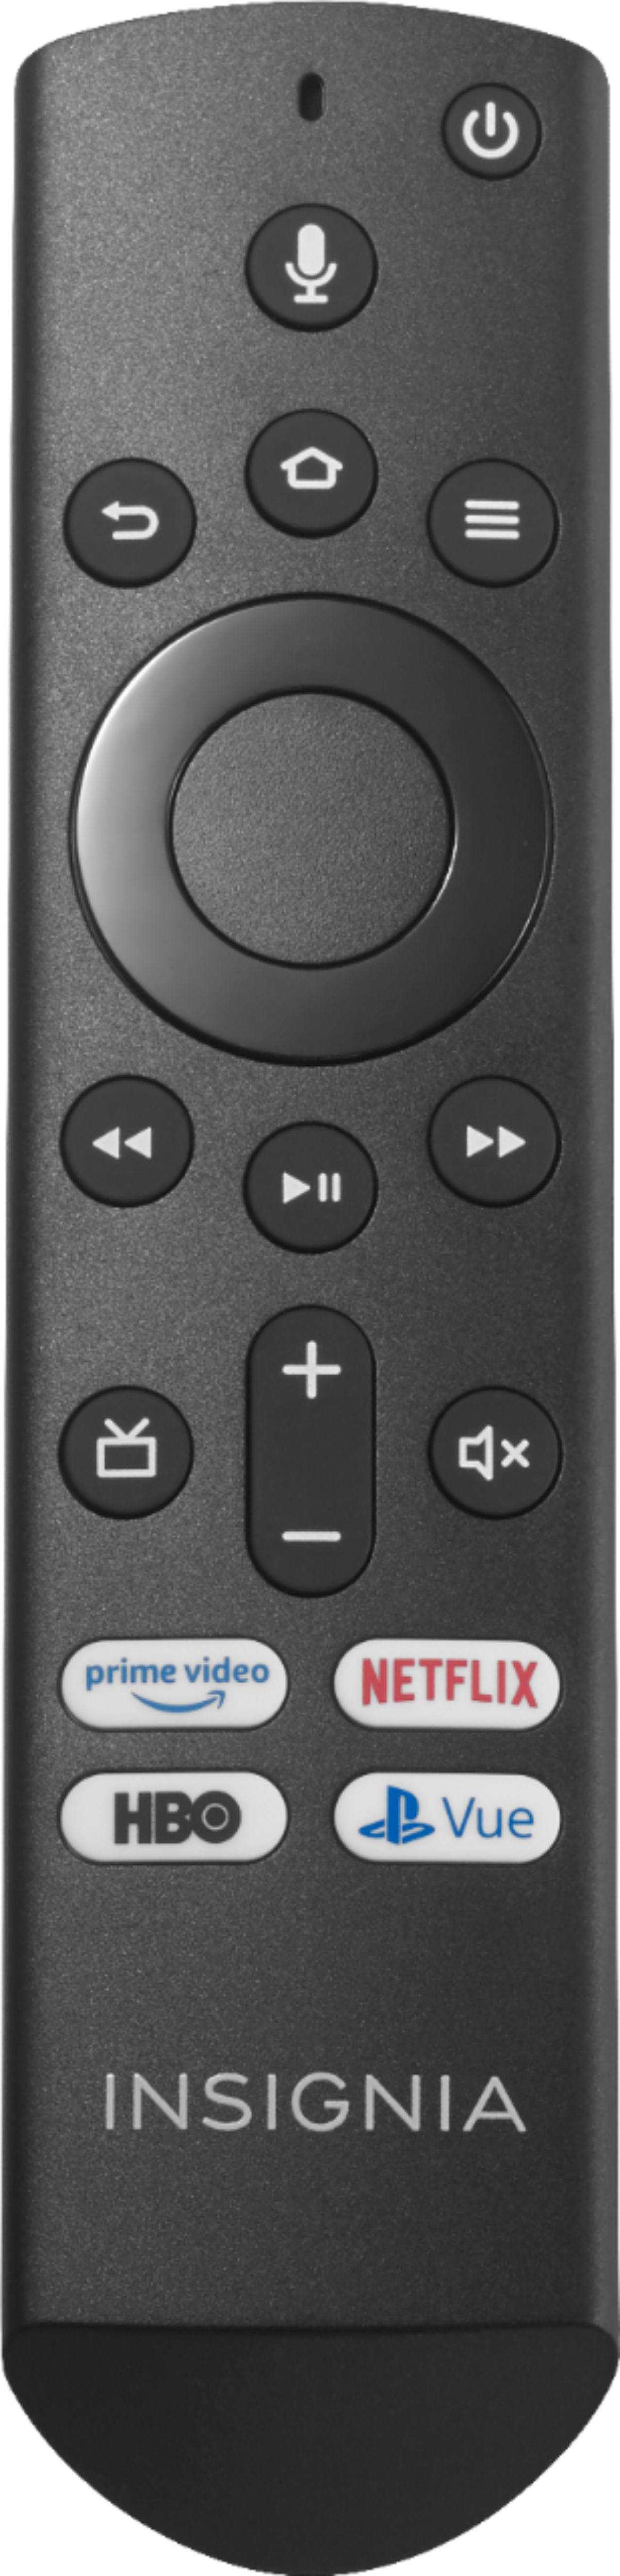 Universal Replaced Remote Control Compatible with Insignia Fire TV & Toshiba Fire TV 